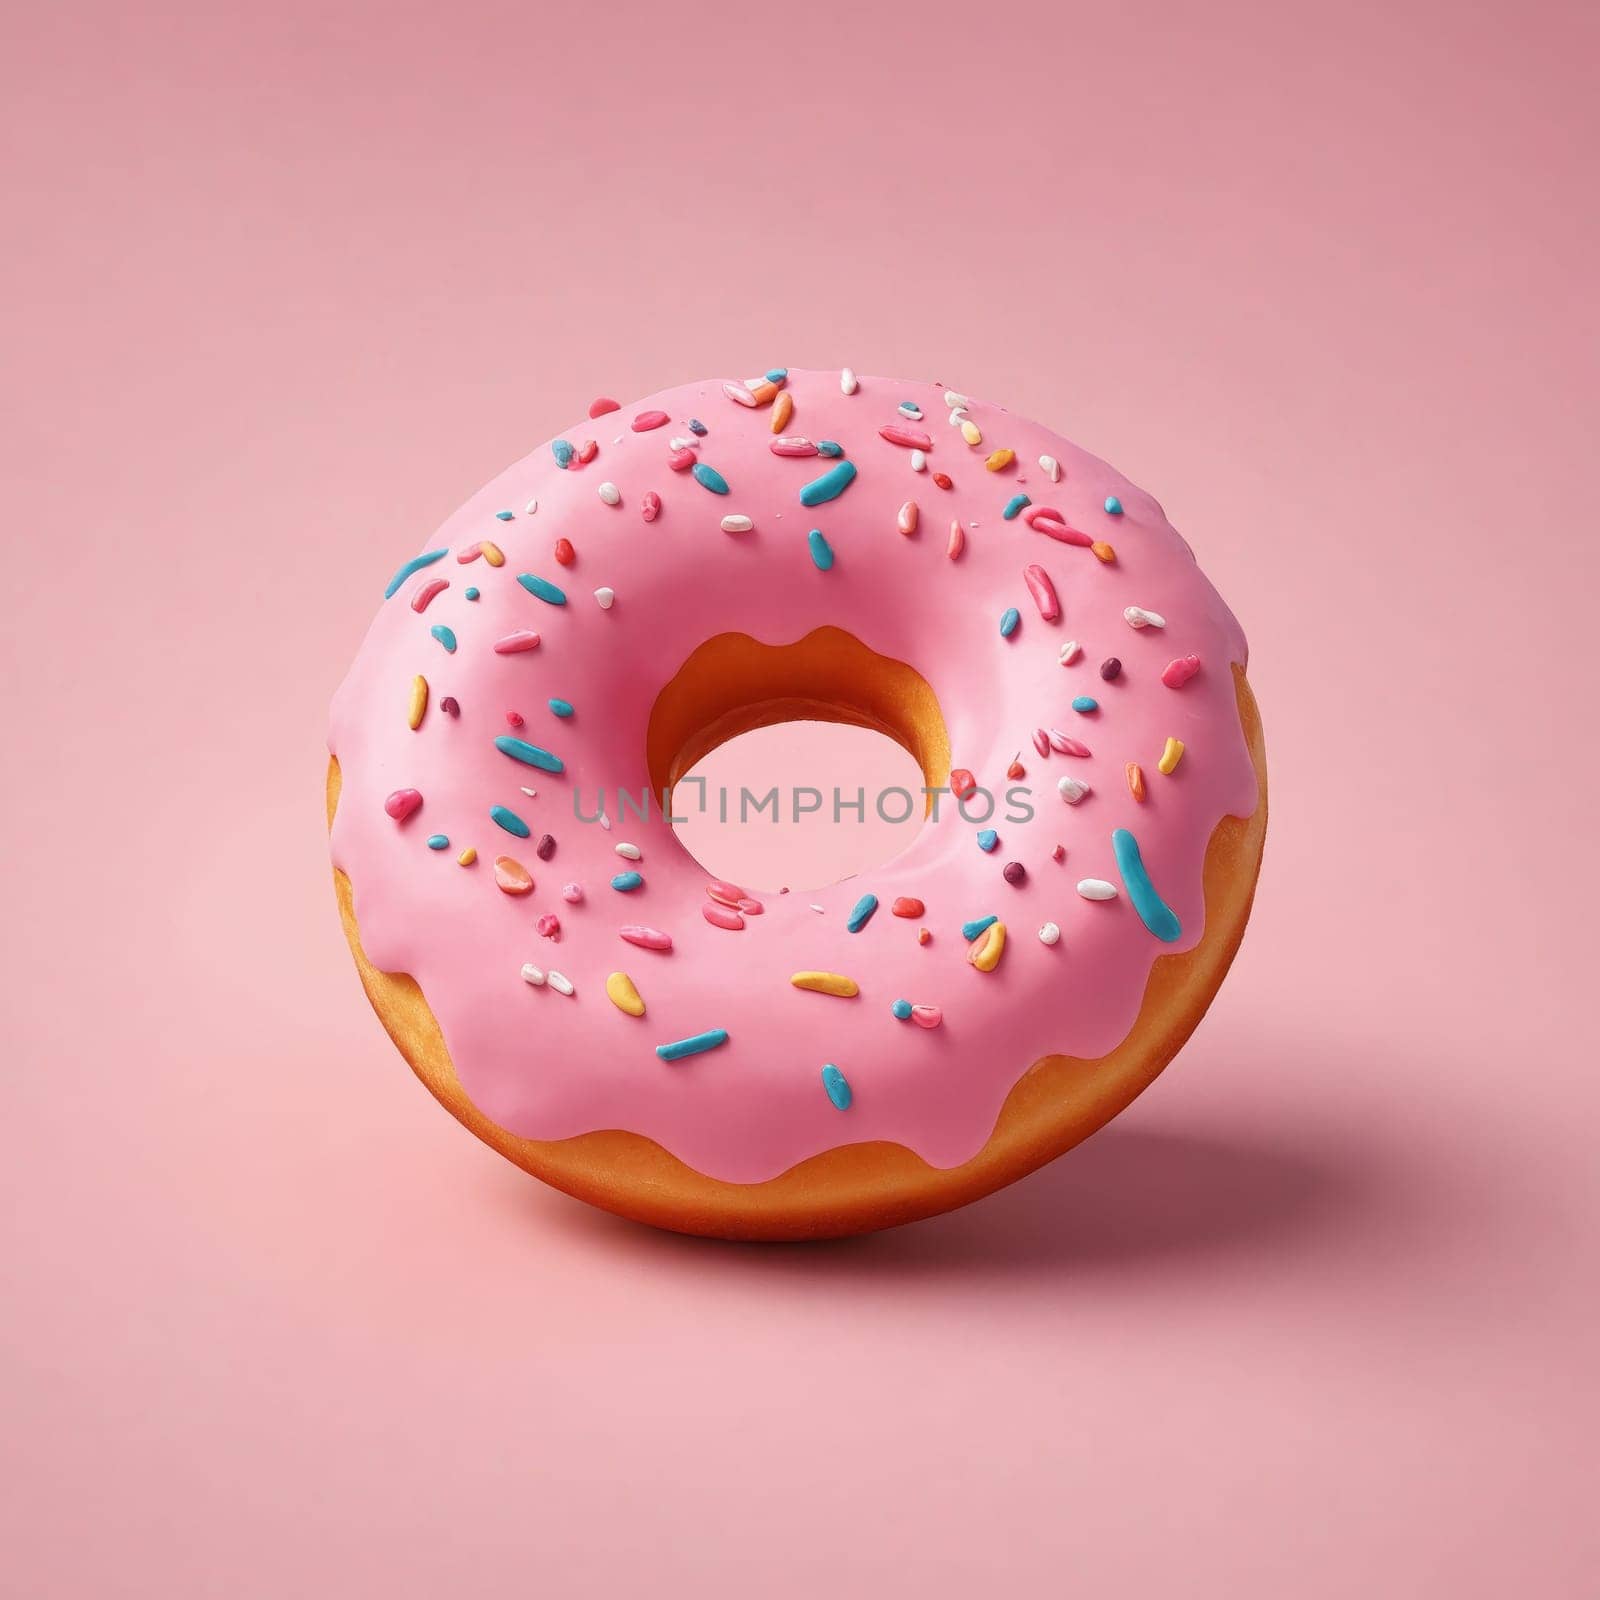 Magenta doughnut with pink frosting and sprinkles on pink background by Andre1ns